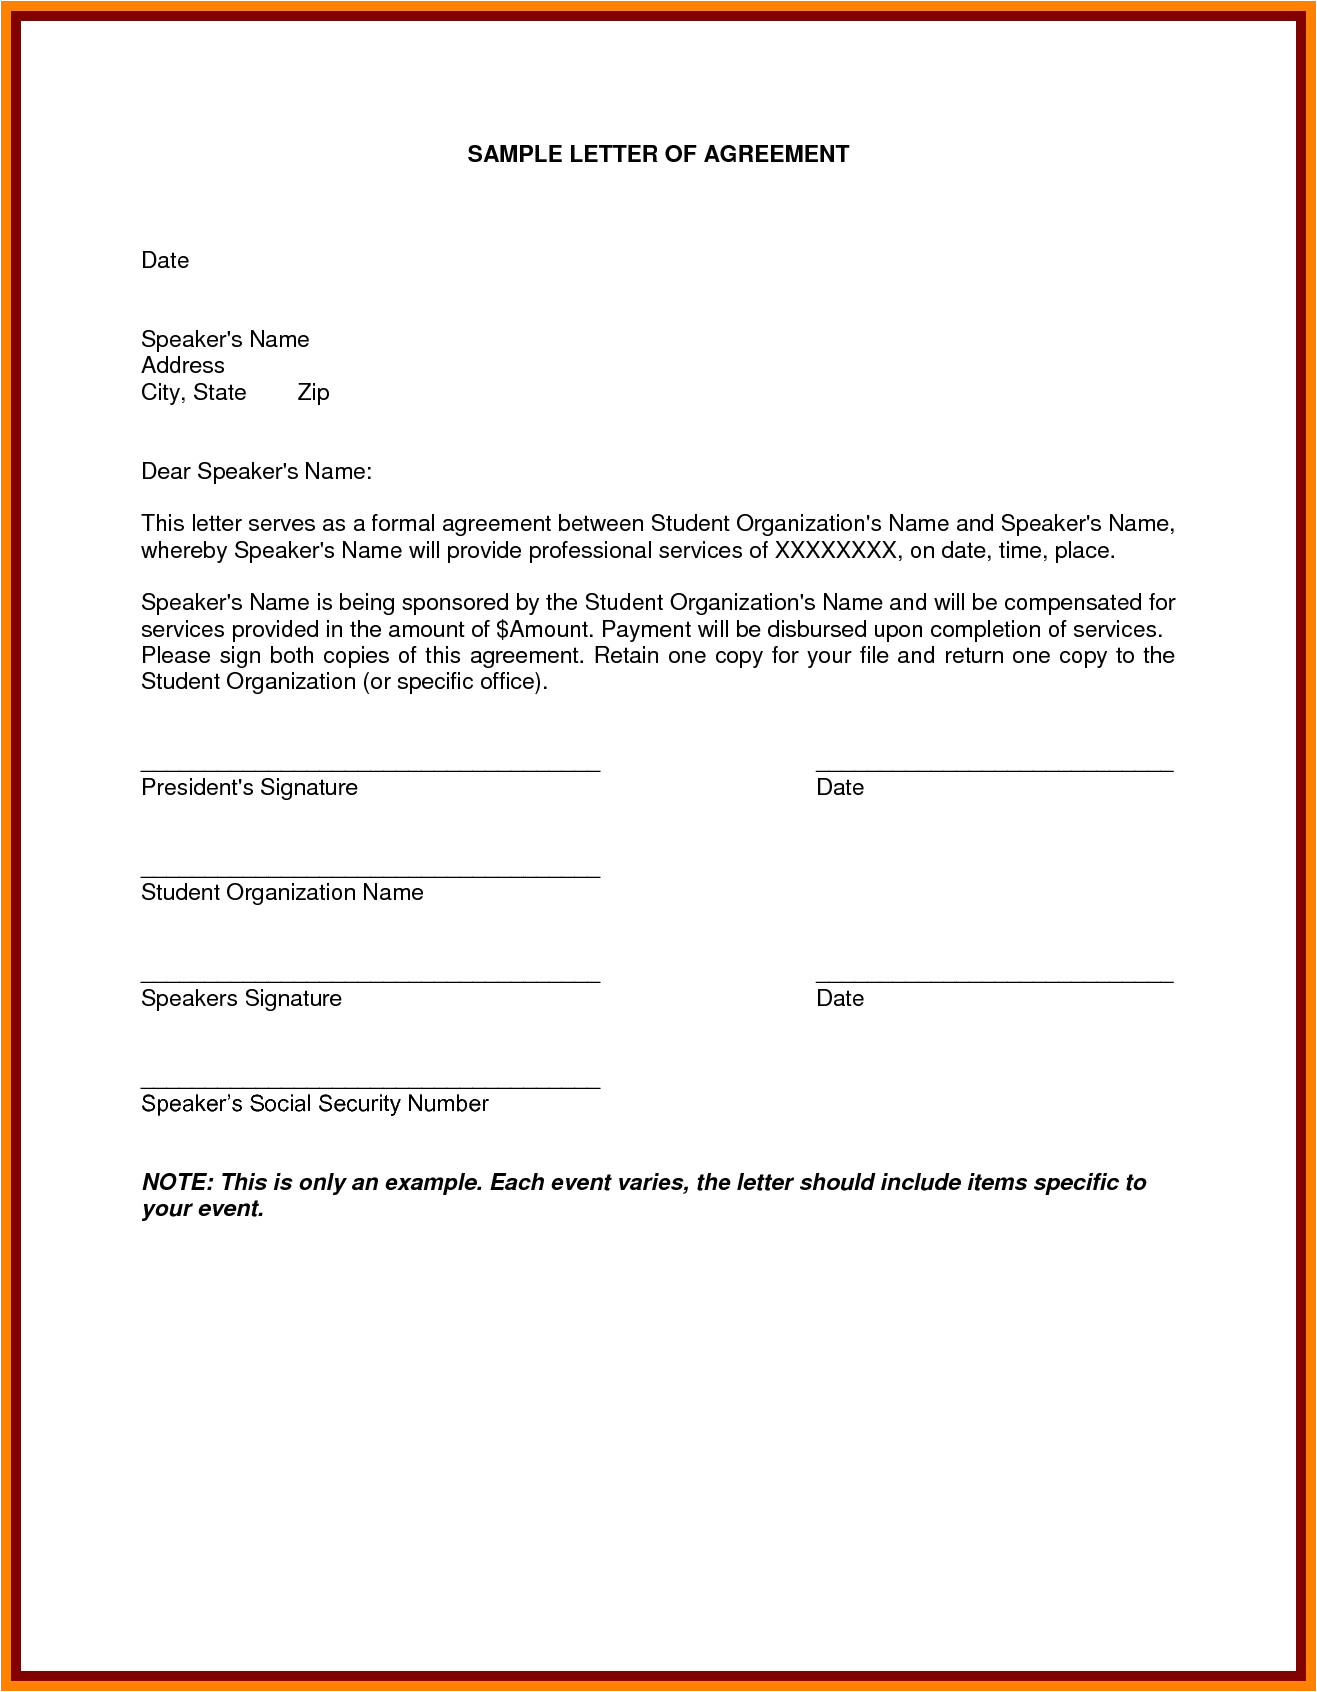 Soa Service Contract Template 8 Example Of Letter Of Agreement Penn Working Papers